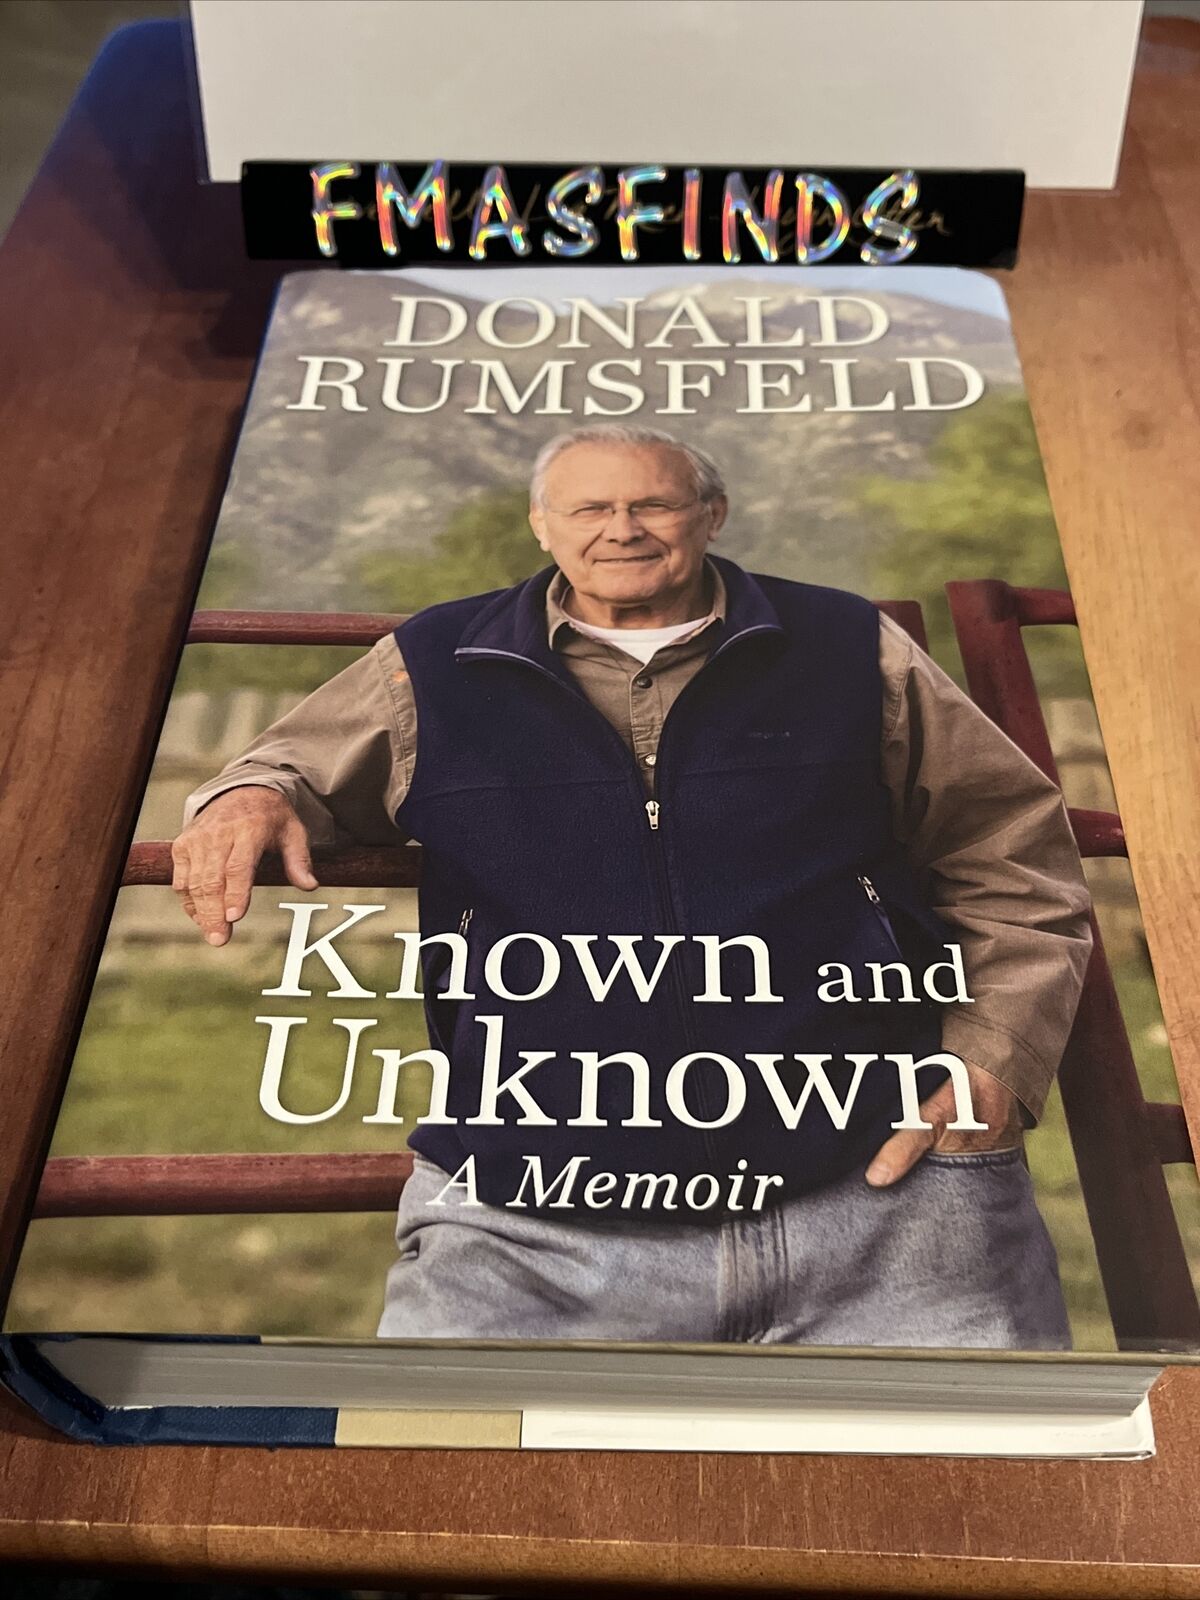 DONALD RUMSFELD Signed Book KNOWN AND UNKNOWN Autographed SECRETARY OF DEFENSE